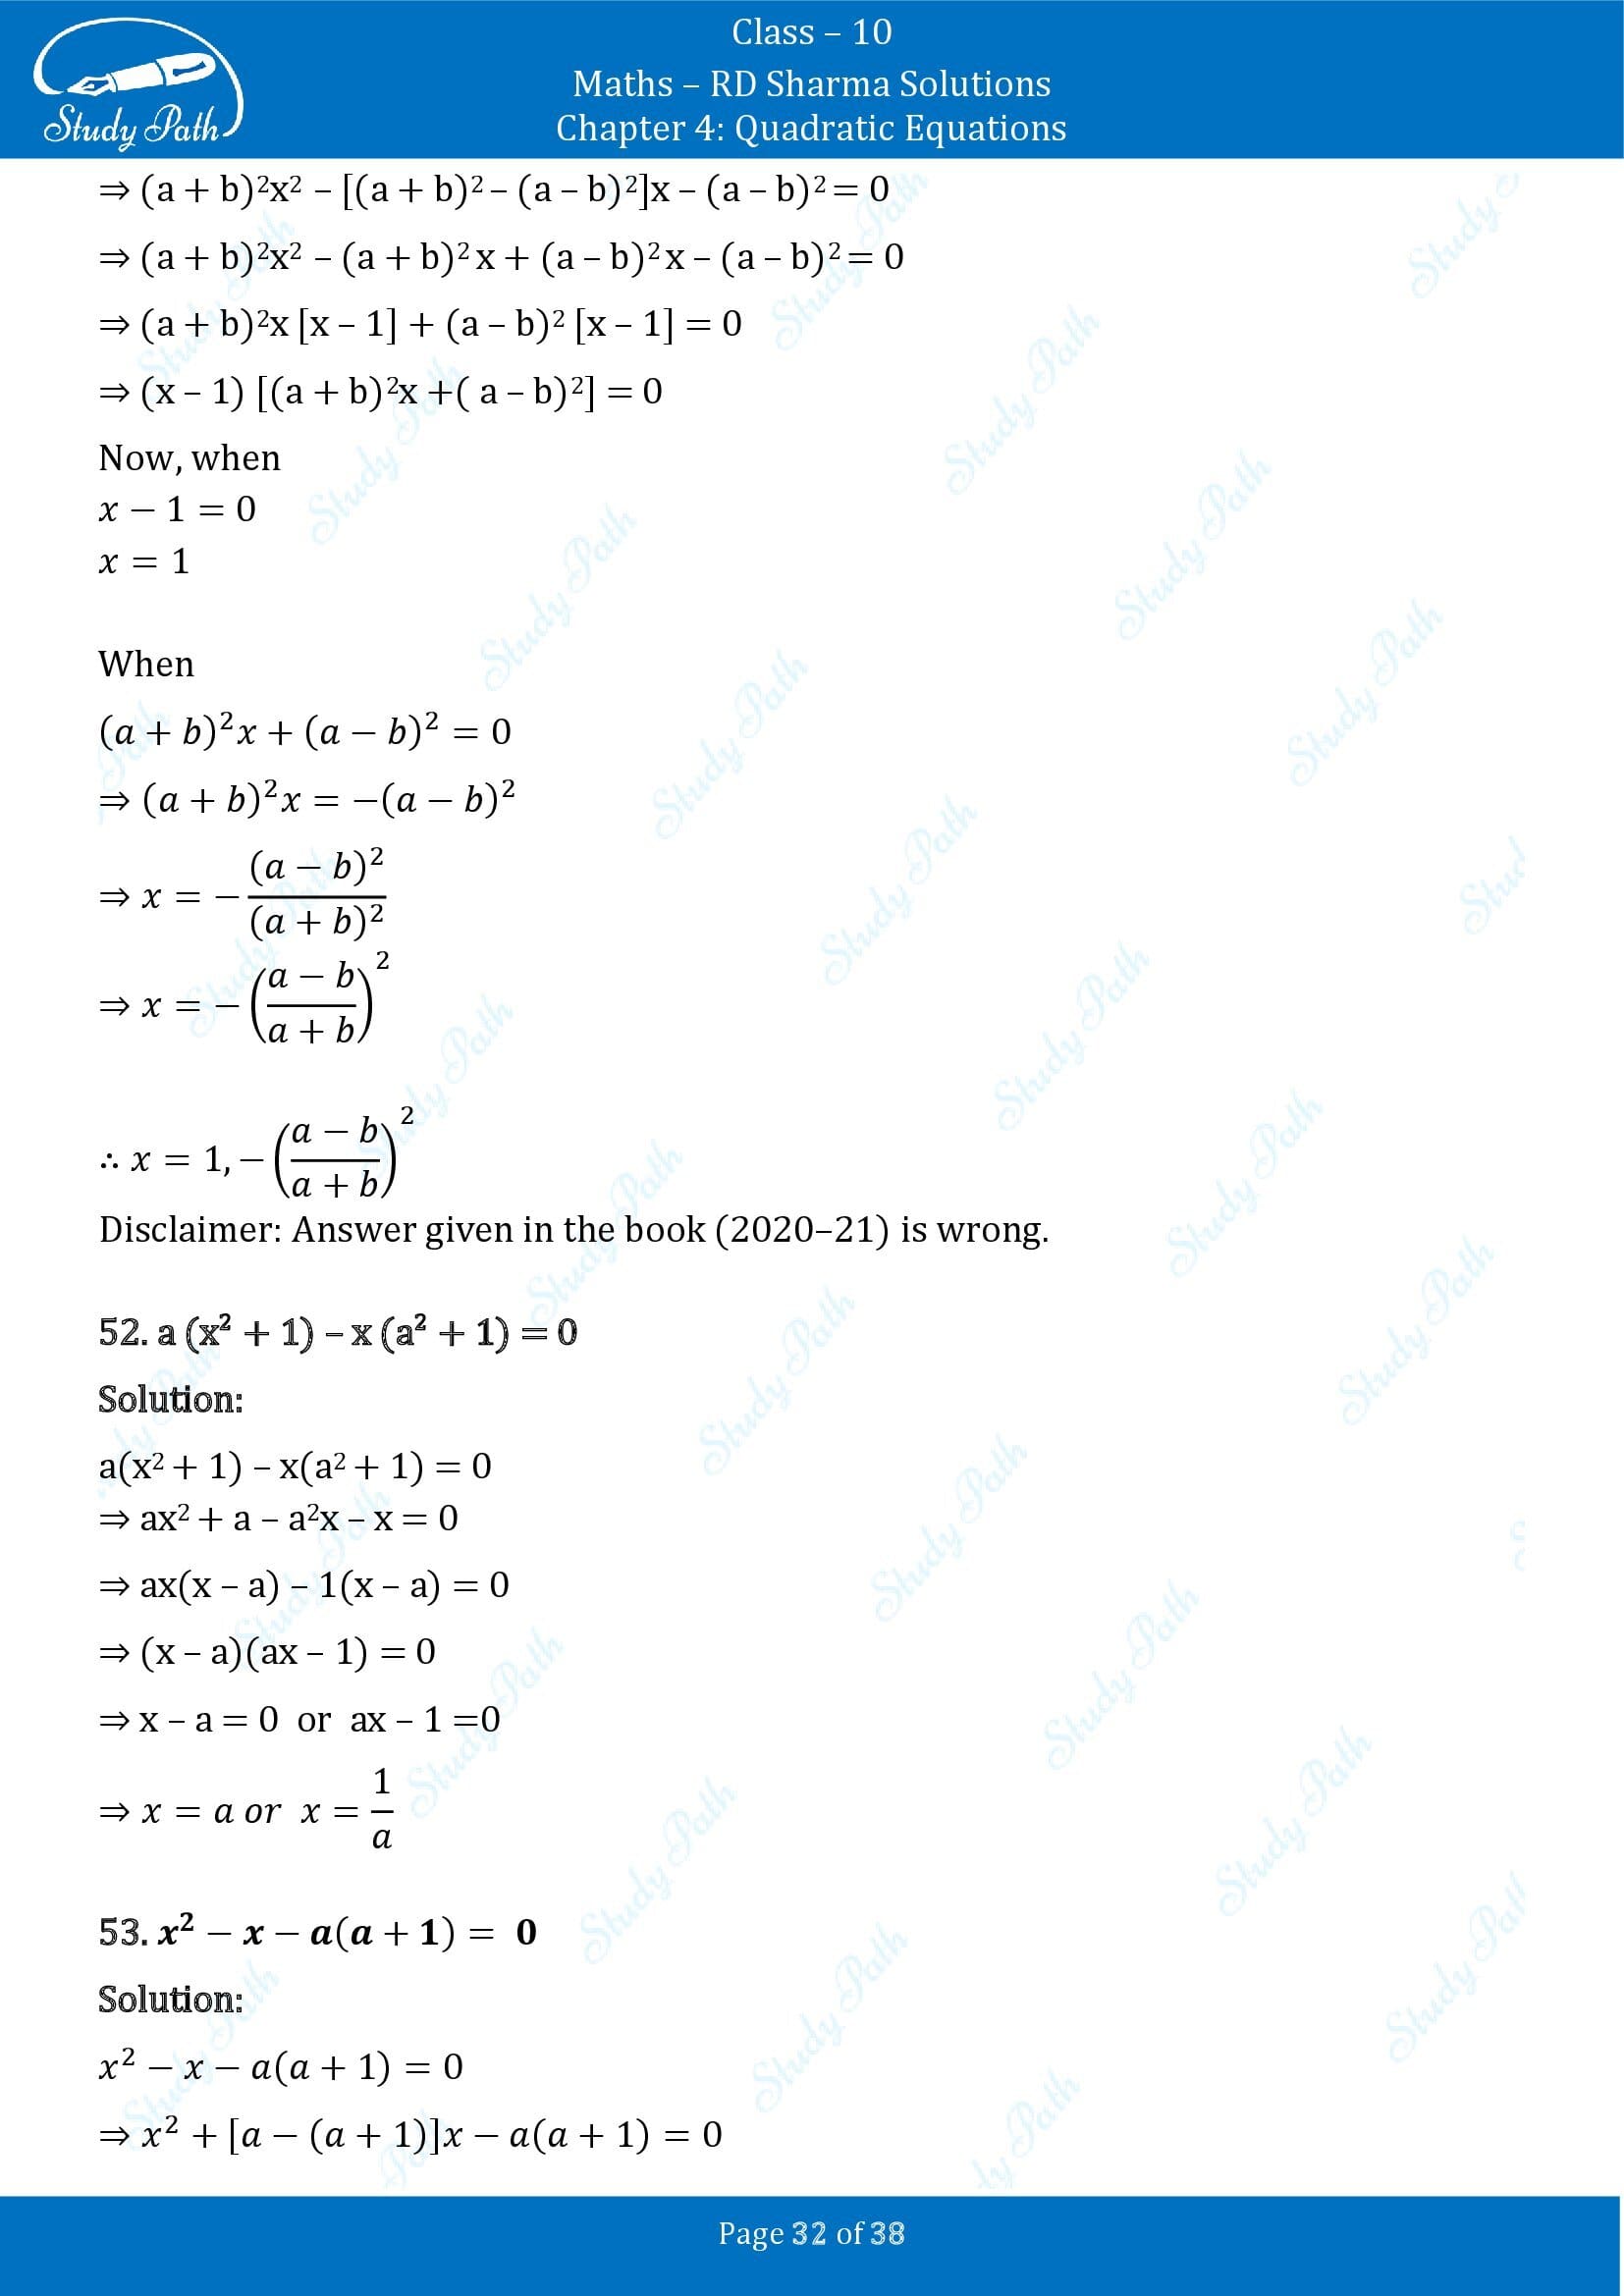 RD Sharma Solutions Class 10 Chapter 4 Quadratic Equations Exercise 4.3 00032